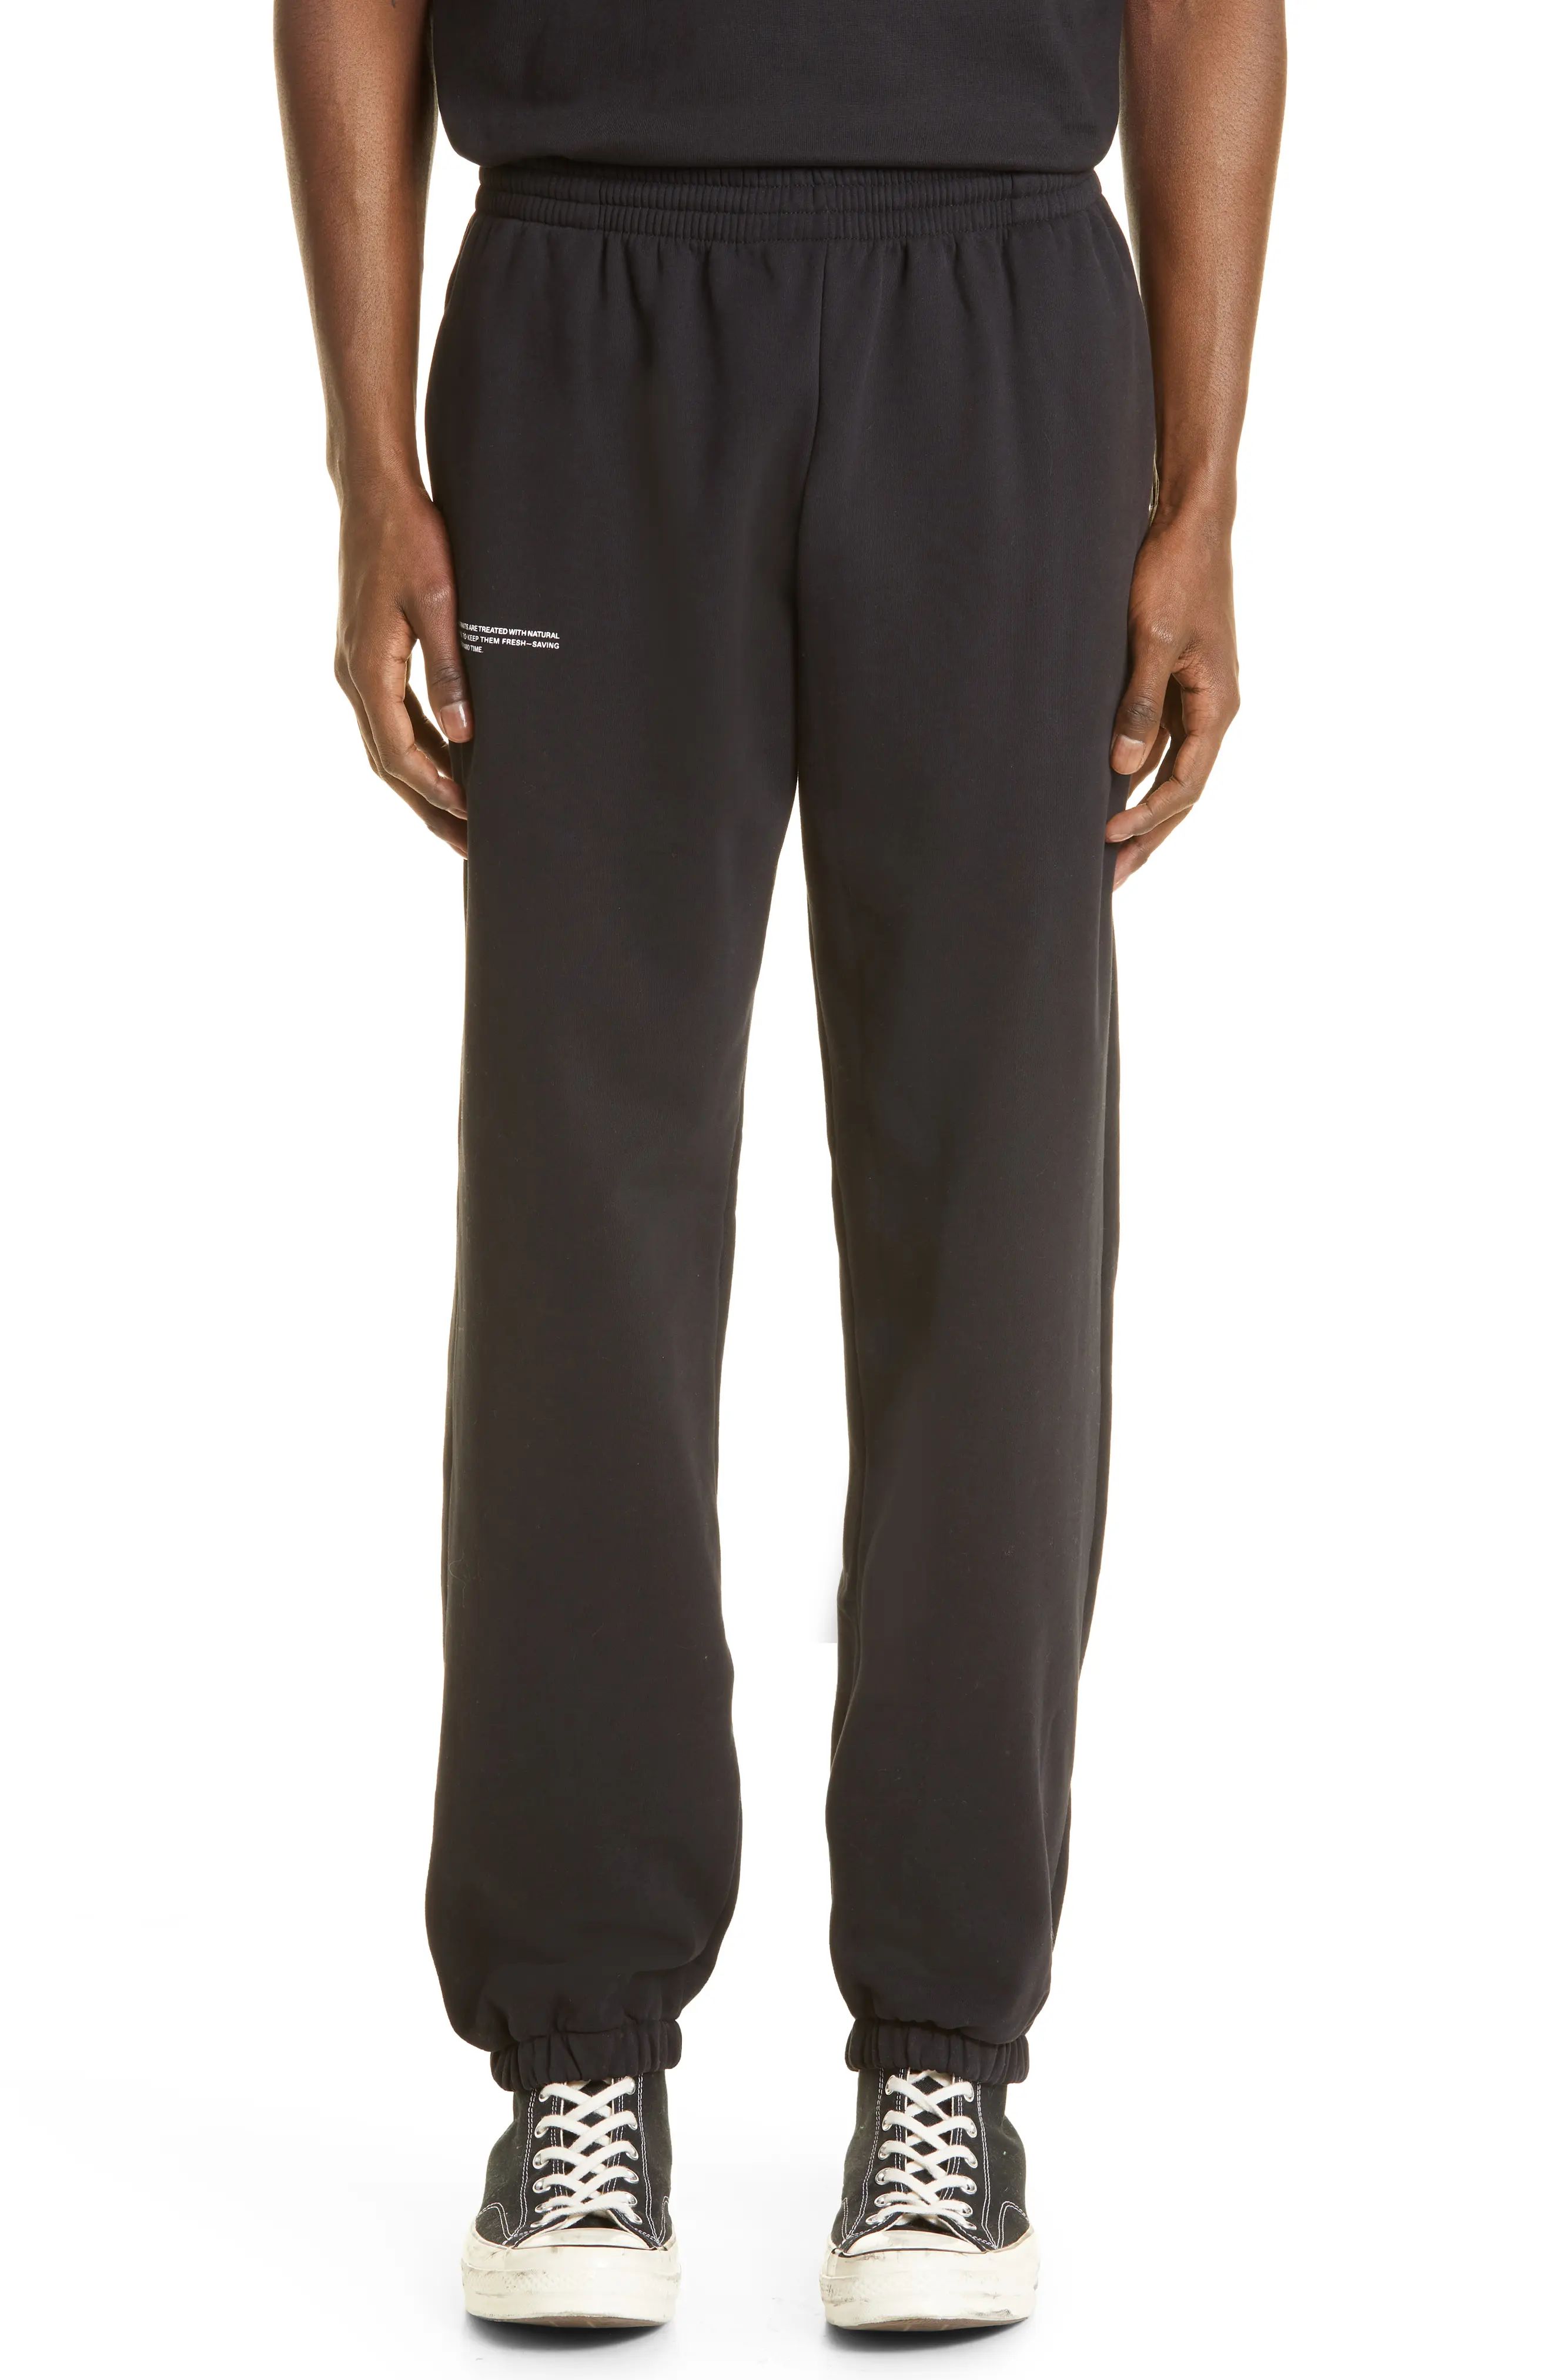 PANGAIA 365 PPRMINT(TM) Unisex Organic Cotton Sweatpants in Black at Nordstrom, Size Small | Nordstrom